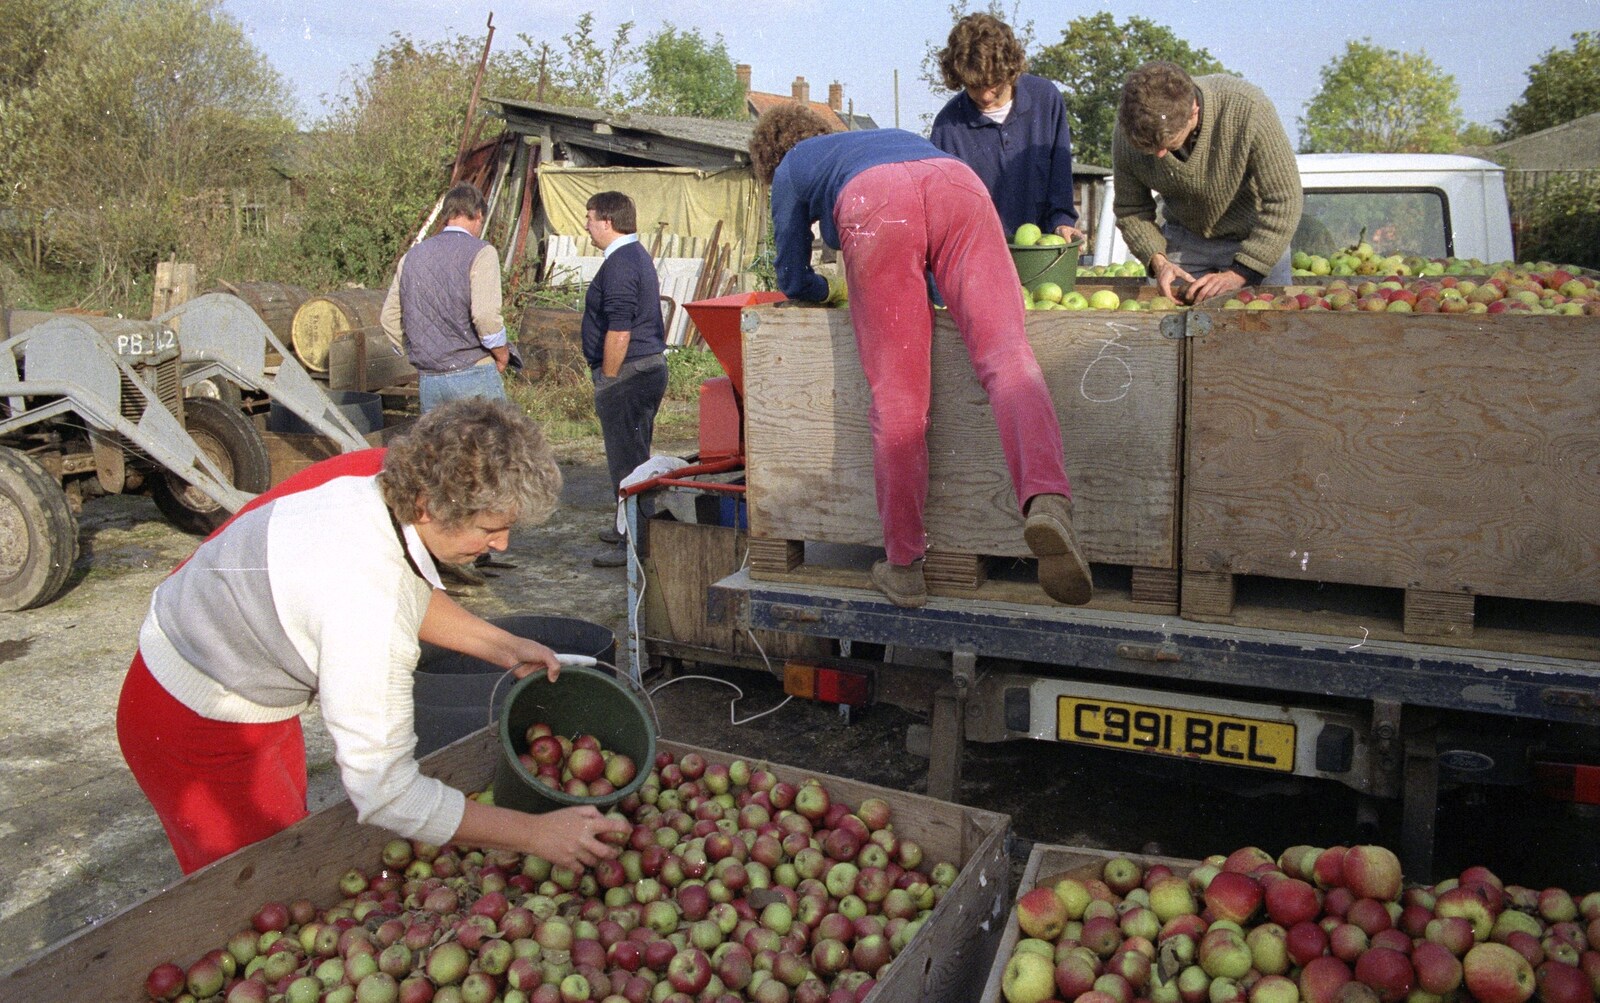 Apples are unloaded from The Annual Cider Making Event, Stuston, Suffolk - 11th October 1990